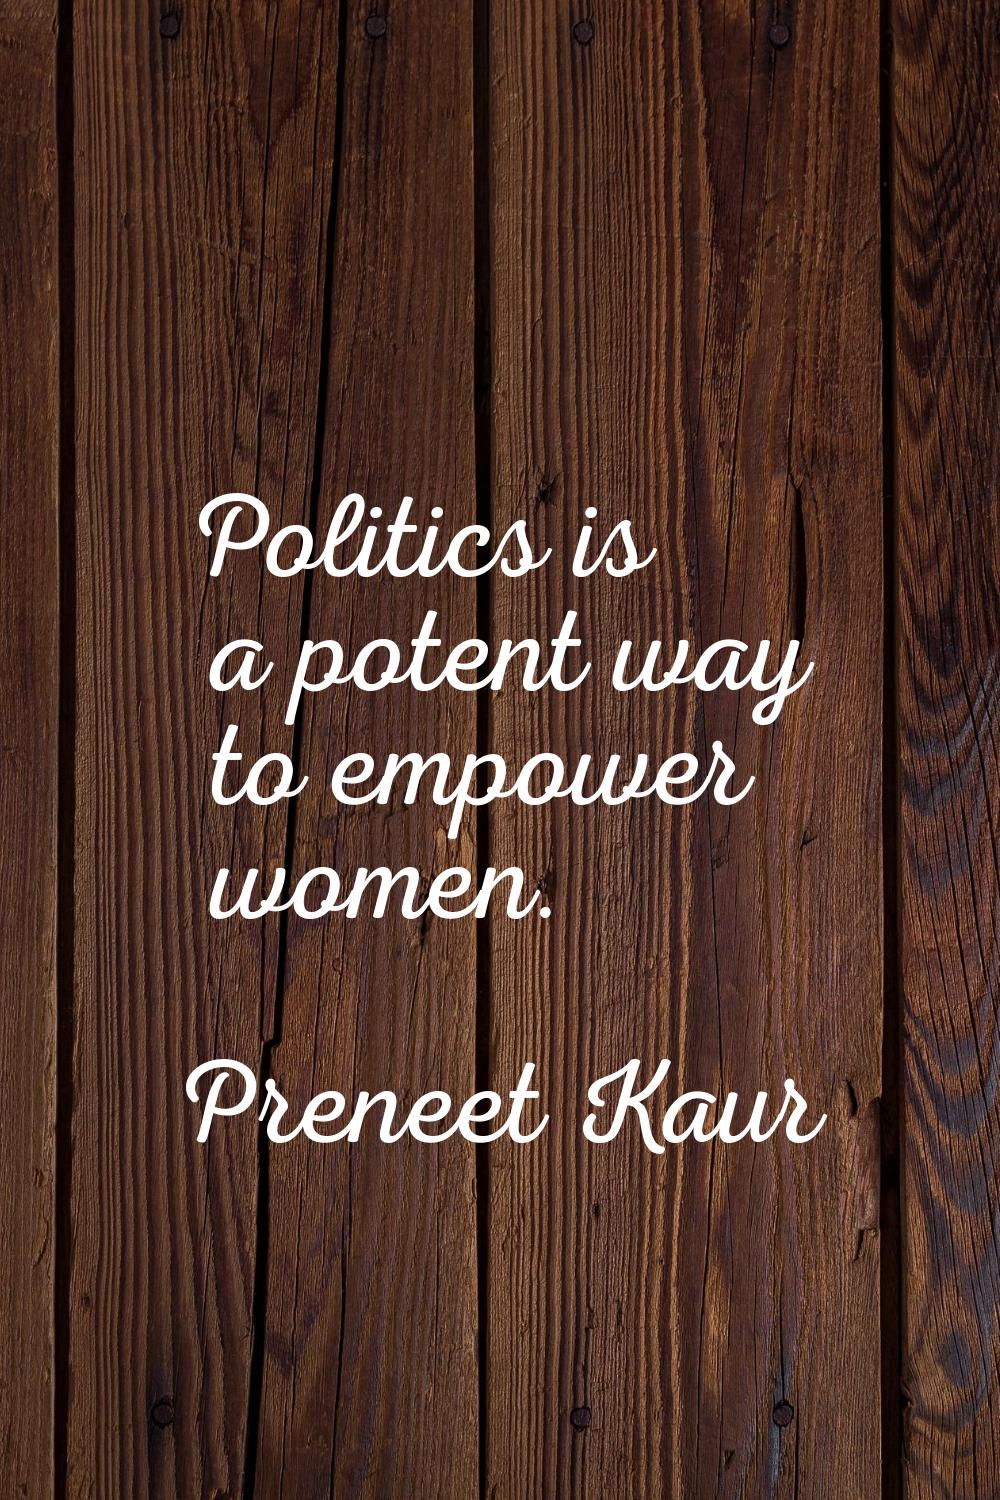 Politics is a potent way to empower women.